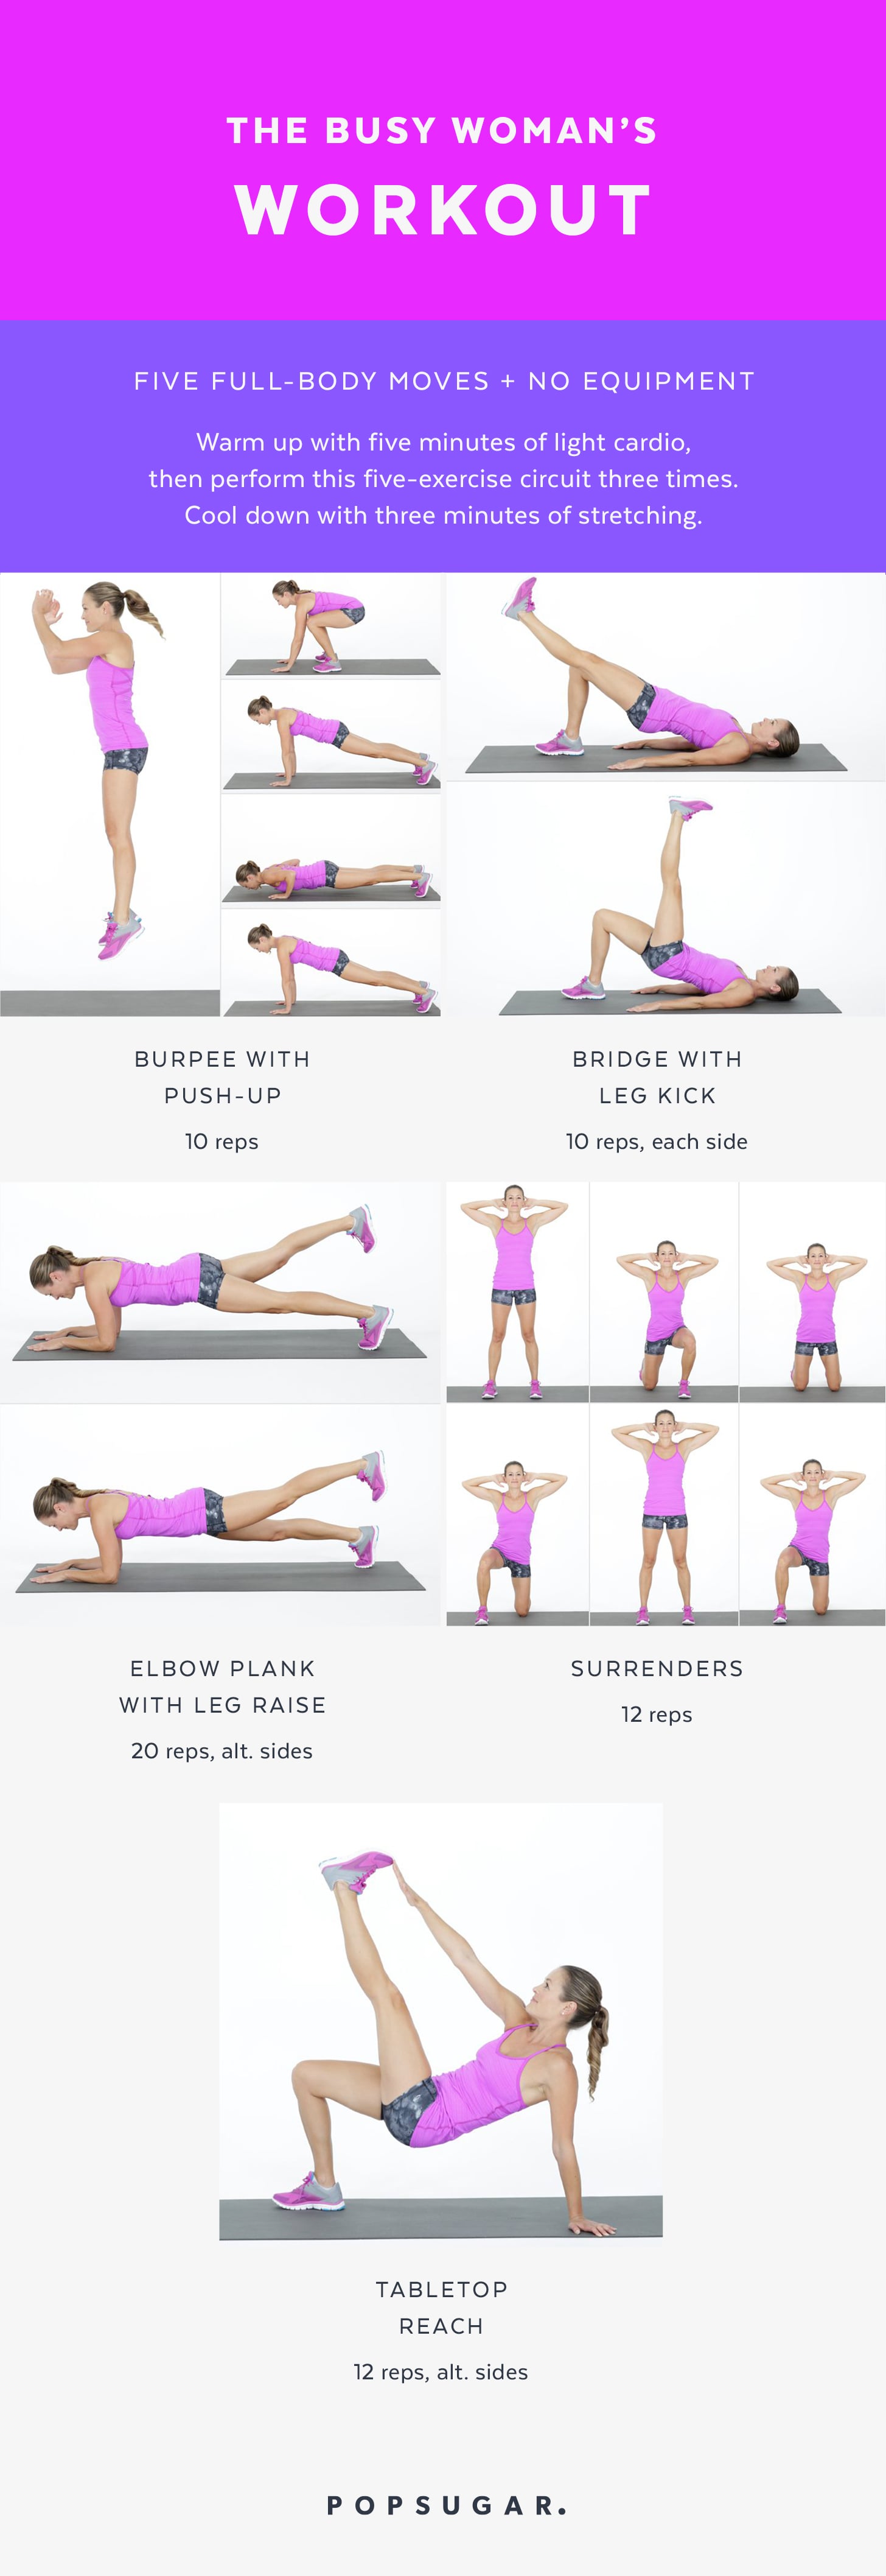 How to Do At-Home Workouts for Women